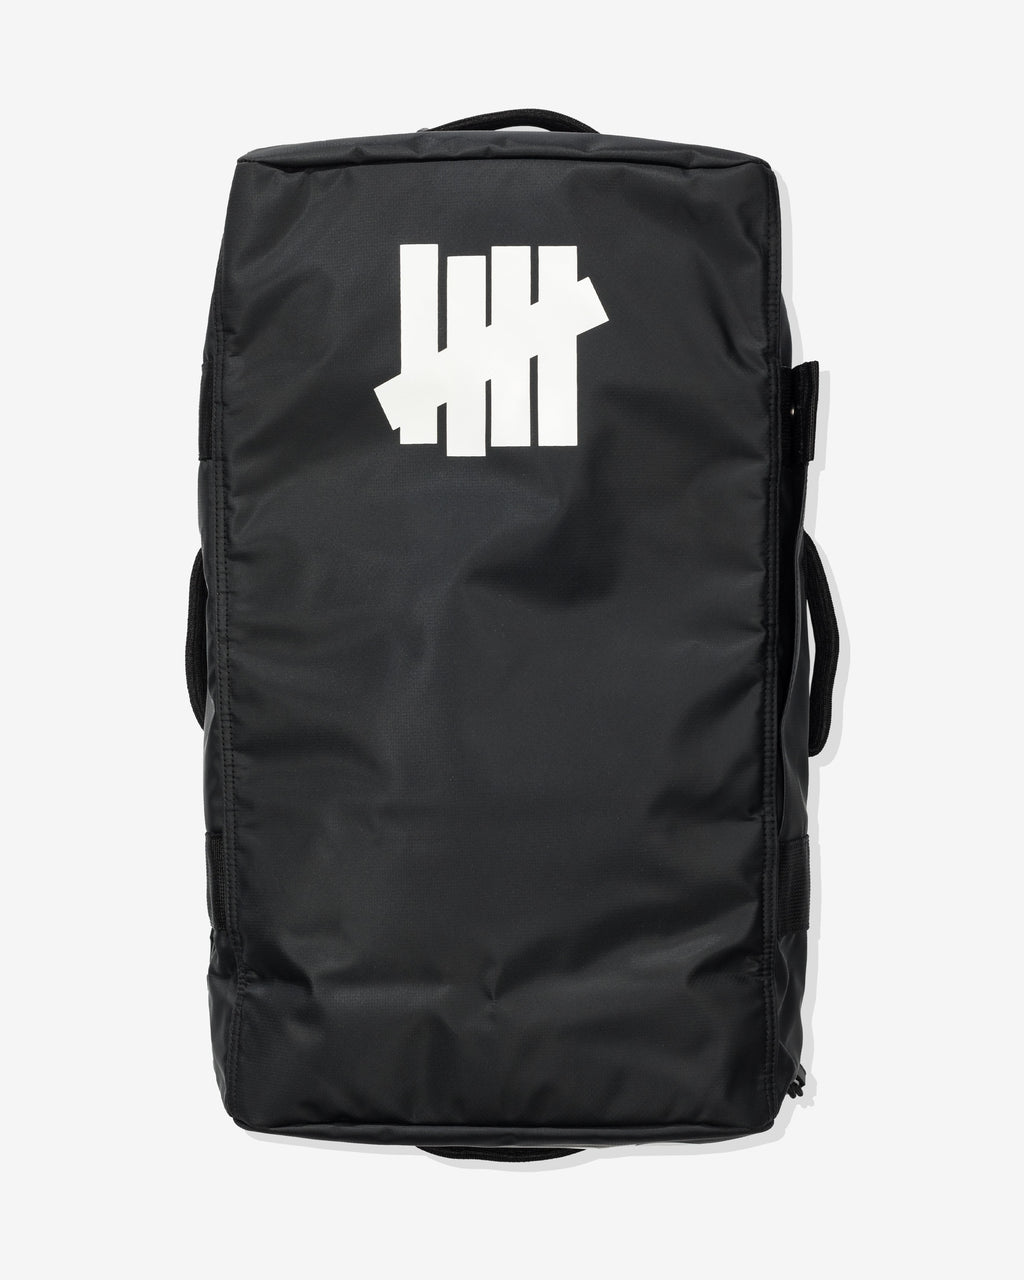 UNDEFEATED CANVAS BACKPACK – Undefeated